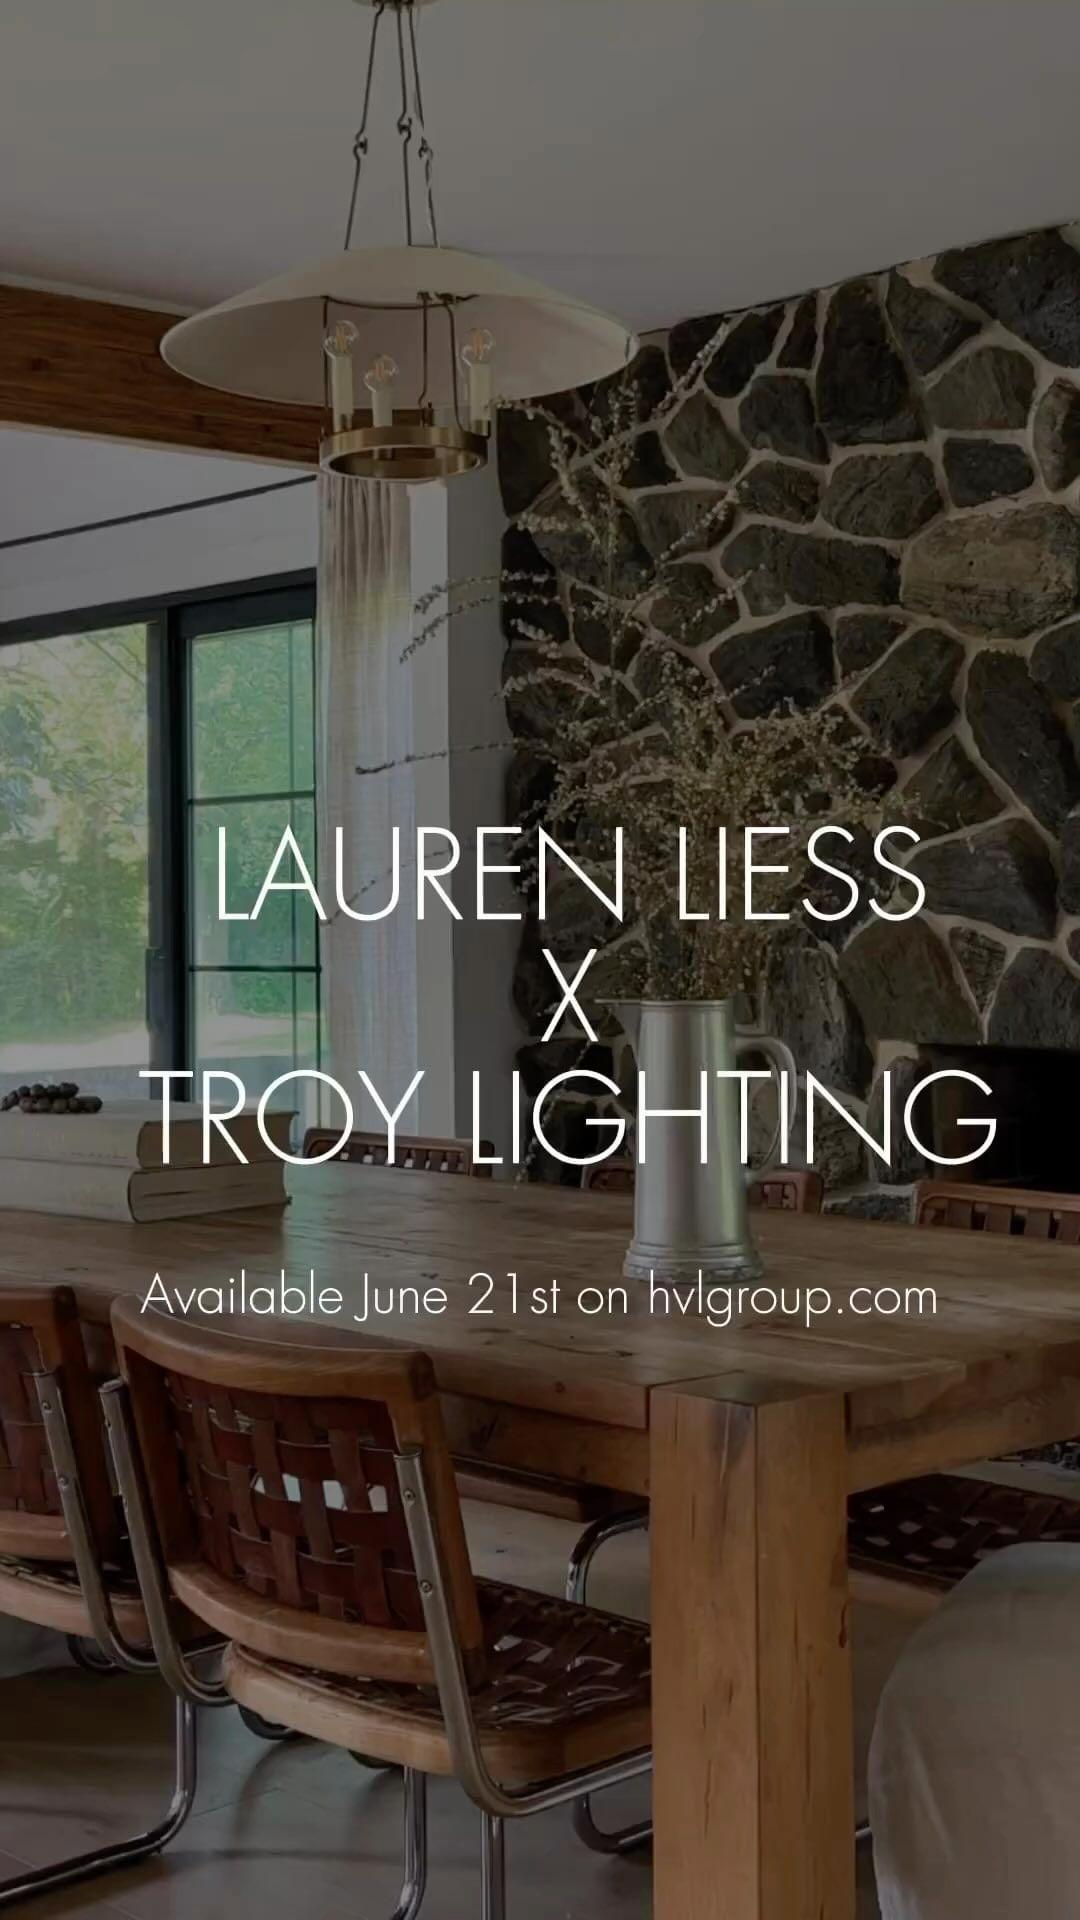 class="content__text"
 Down-to-earth living is just around the corner. @laurenliess X Troy is coming soon 6.21. #LLXTroy

Photo &amp; Video: @markweinbergnyc ⁠ 
 